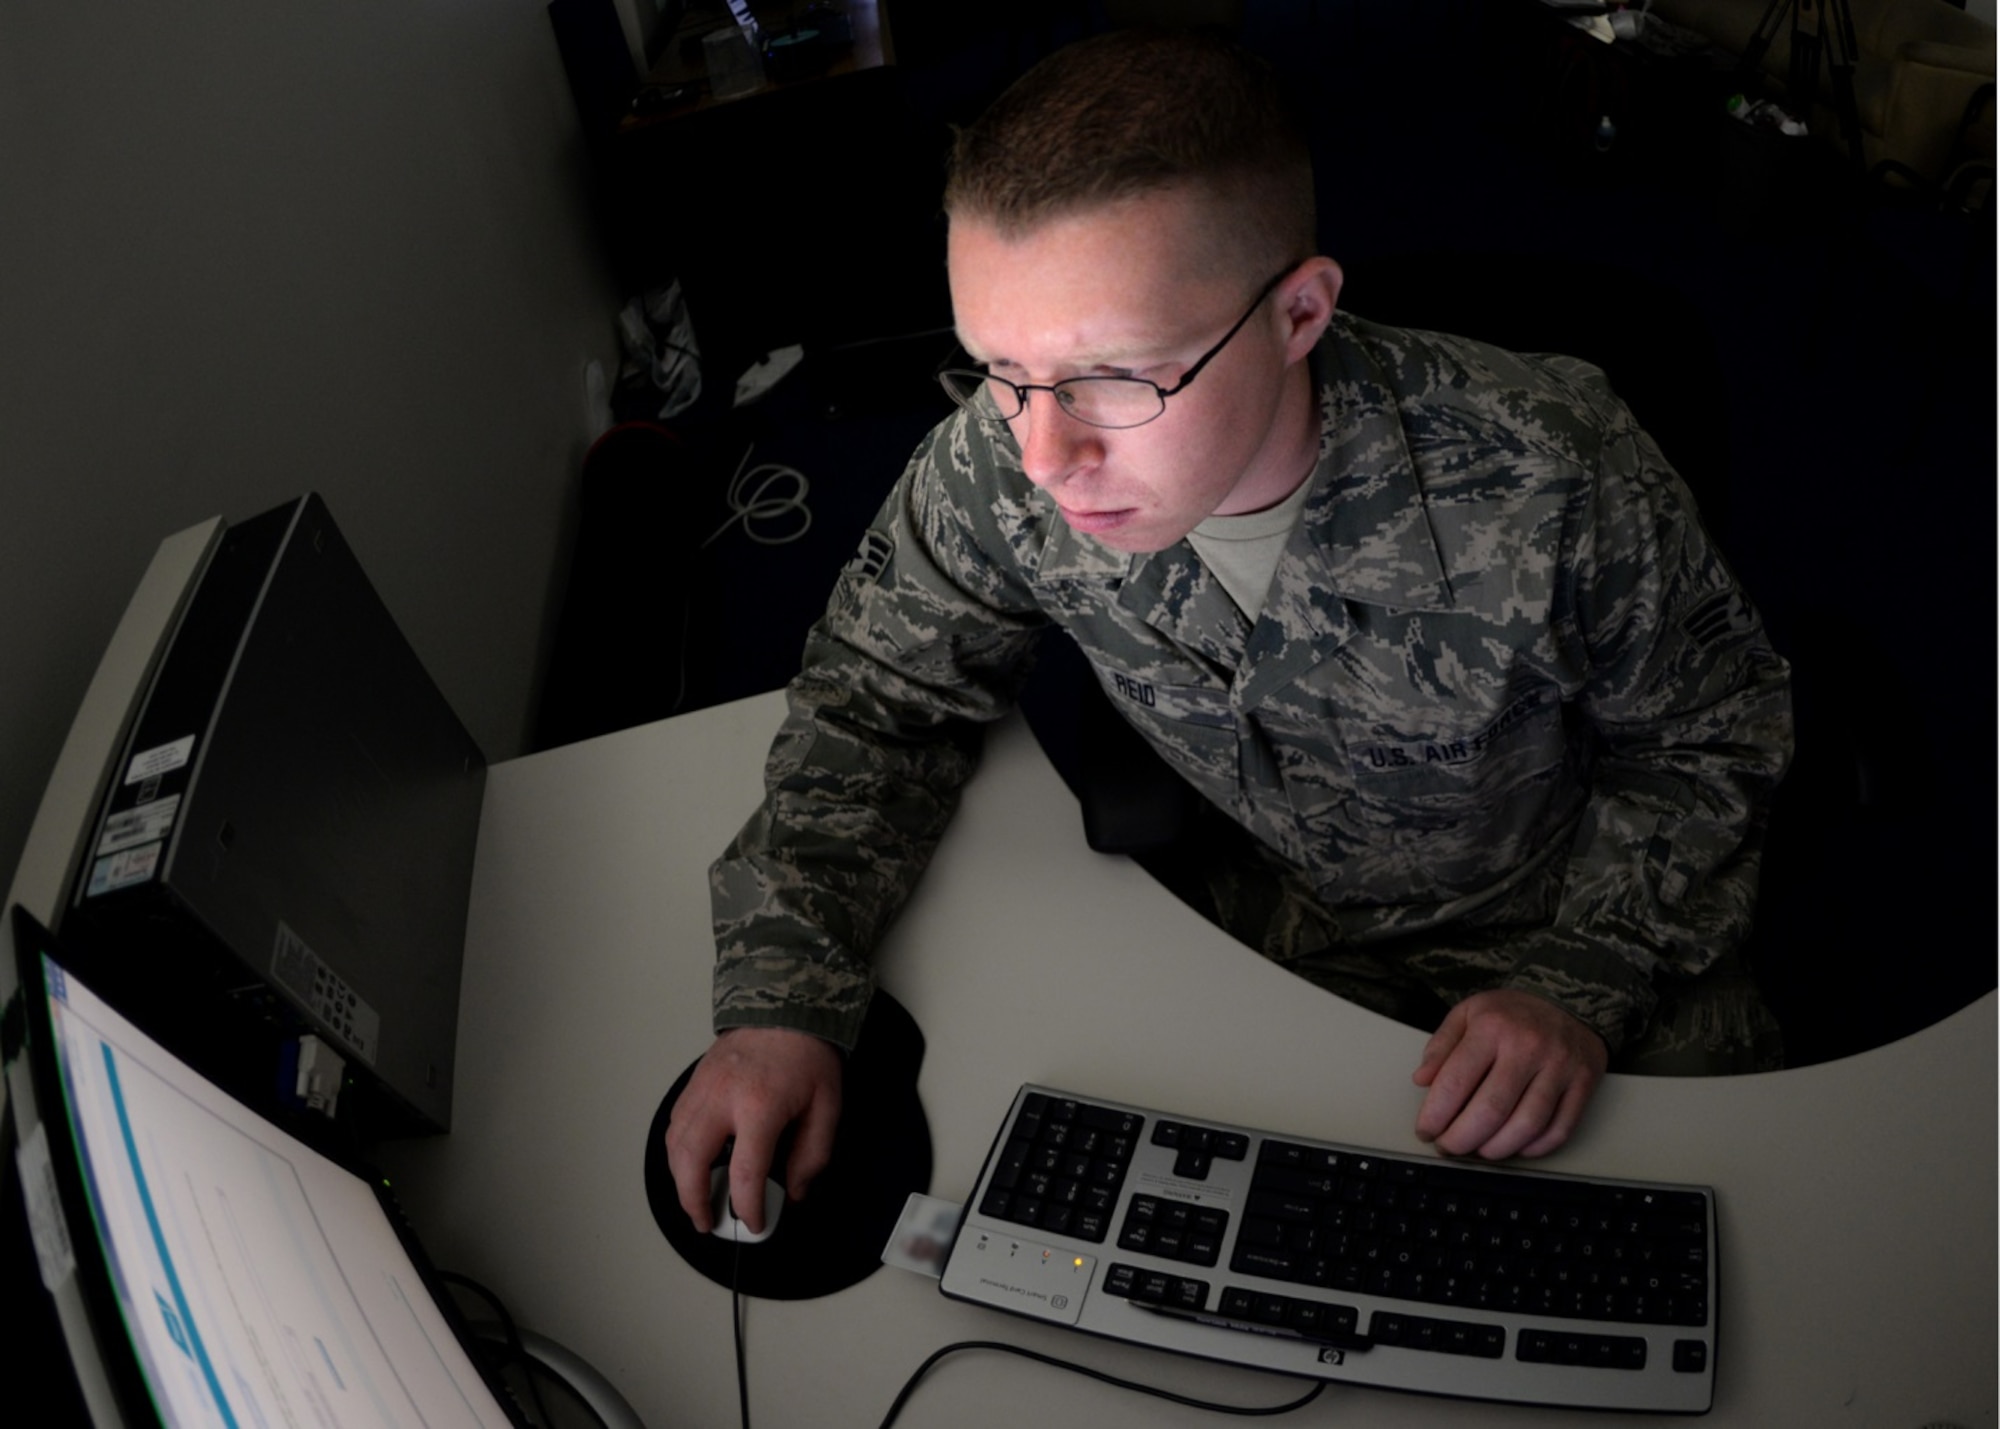 U.S. Air Force Senior Airman Wayne Reid, operations administrative assistant, verifies documents on the Defense Travel System in the 506th Expeditionary Air Refueling Squadron, Andersen Air Force Base, Guam, Jan. 29, 2015. Reid was deployed with the Operations Group from the 157th Air Refueling Wing, N.H., to the 506 EARS. (U.S. Air National Guard photo by Senior Airman Kayla McWalter/RELEASED)